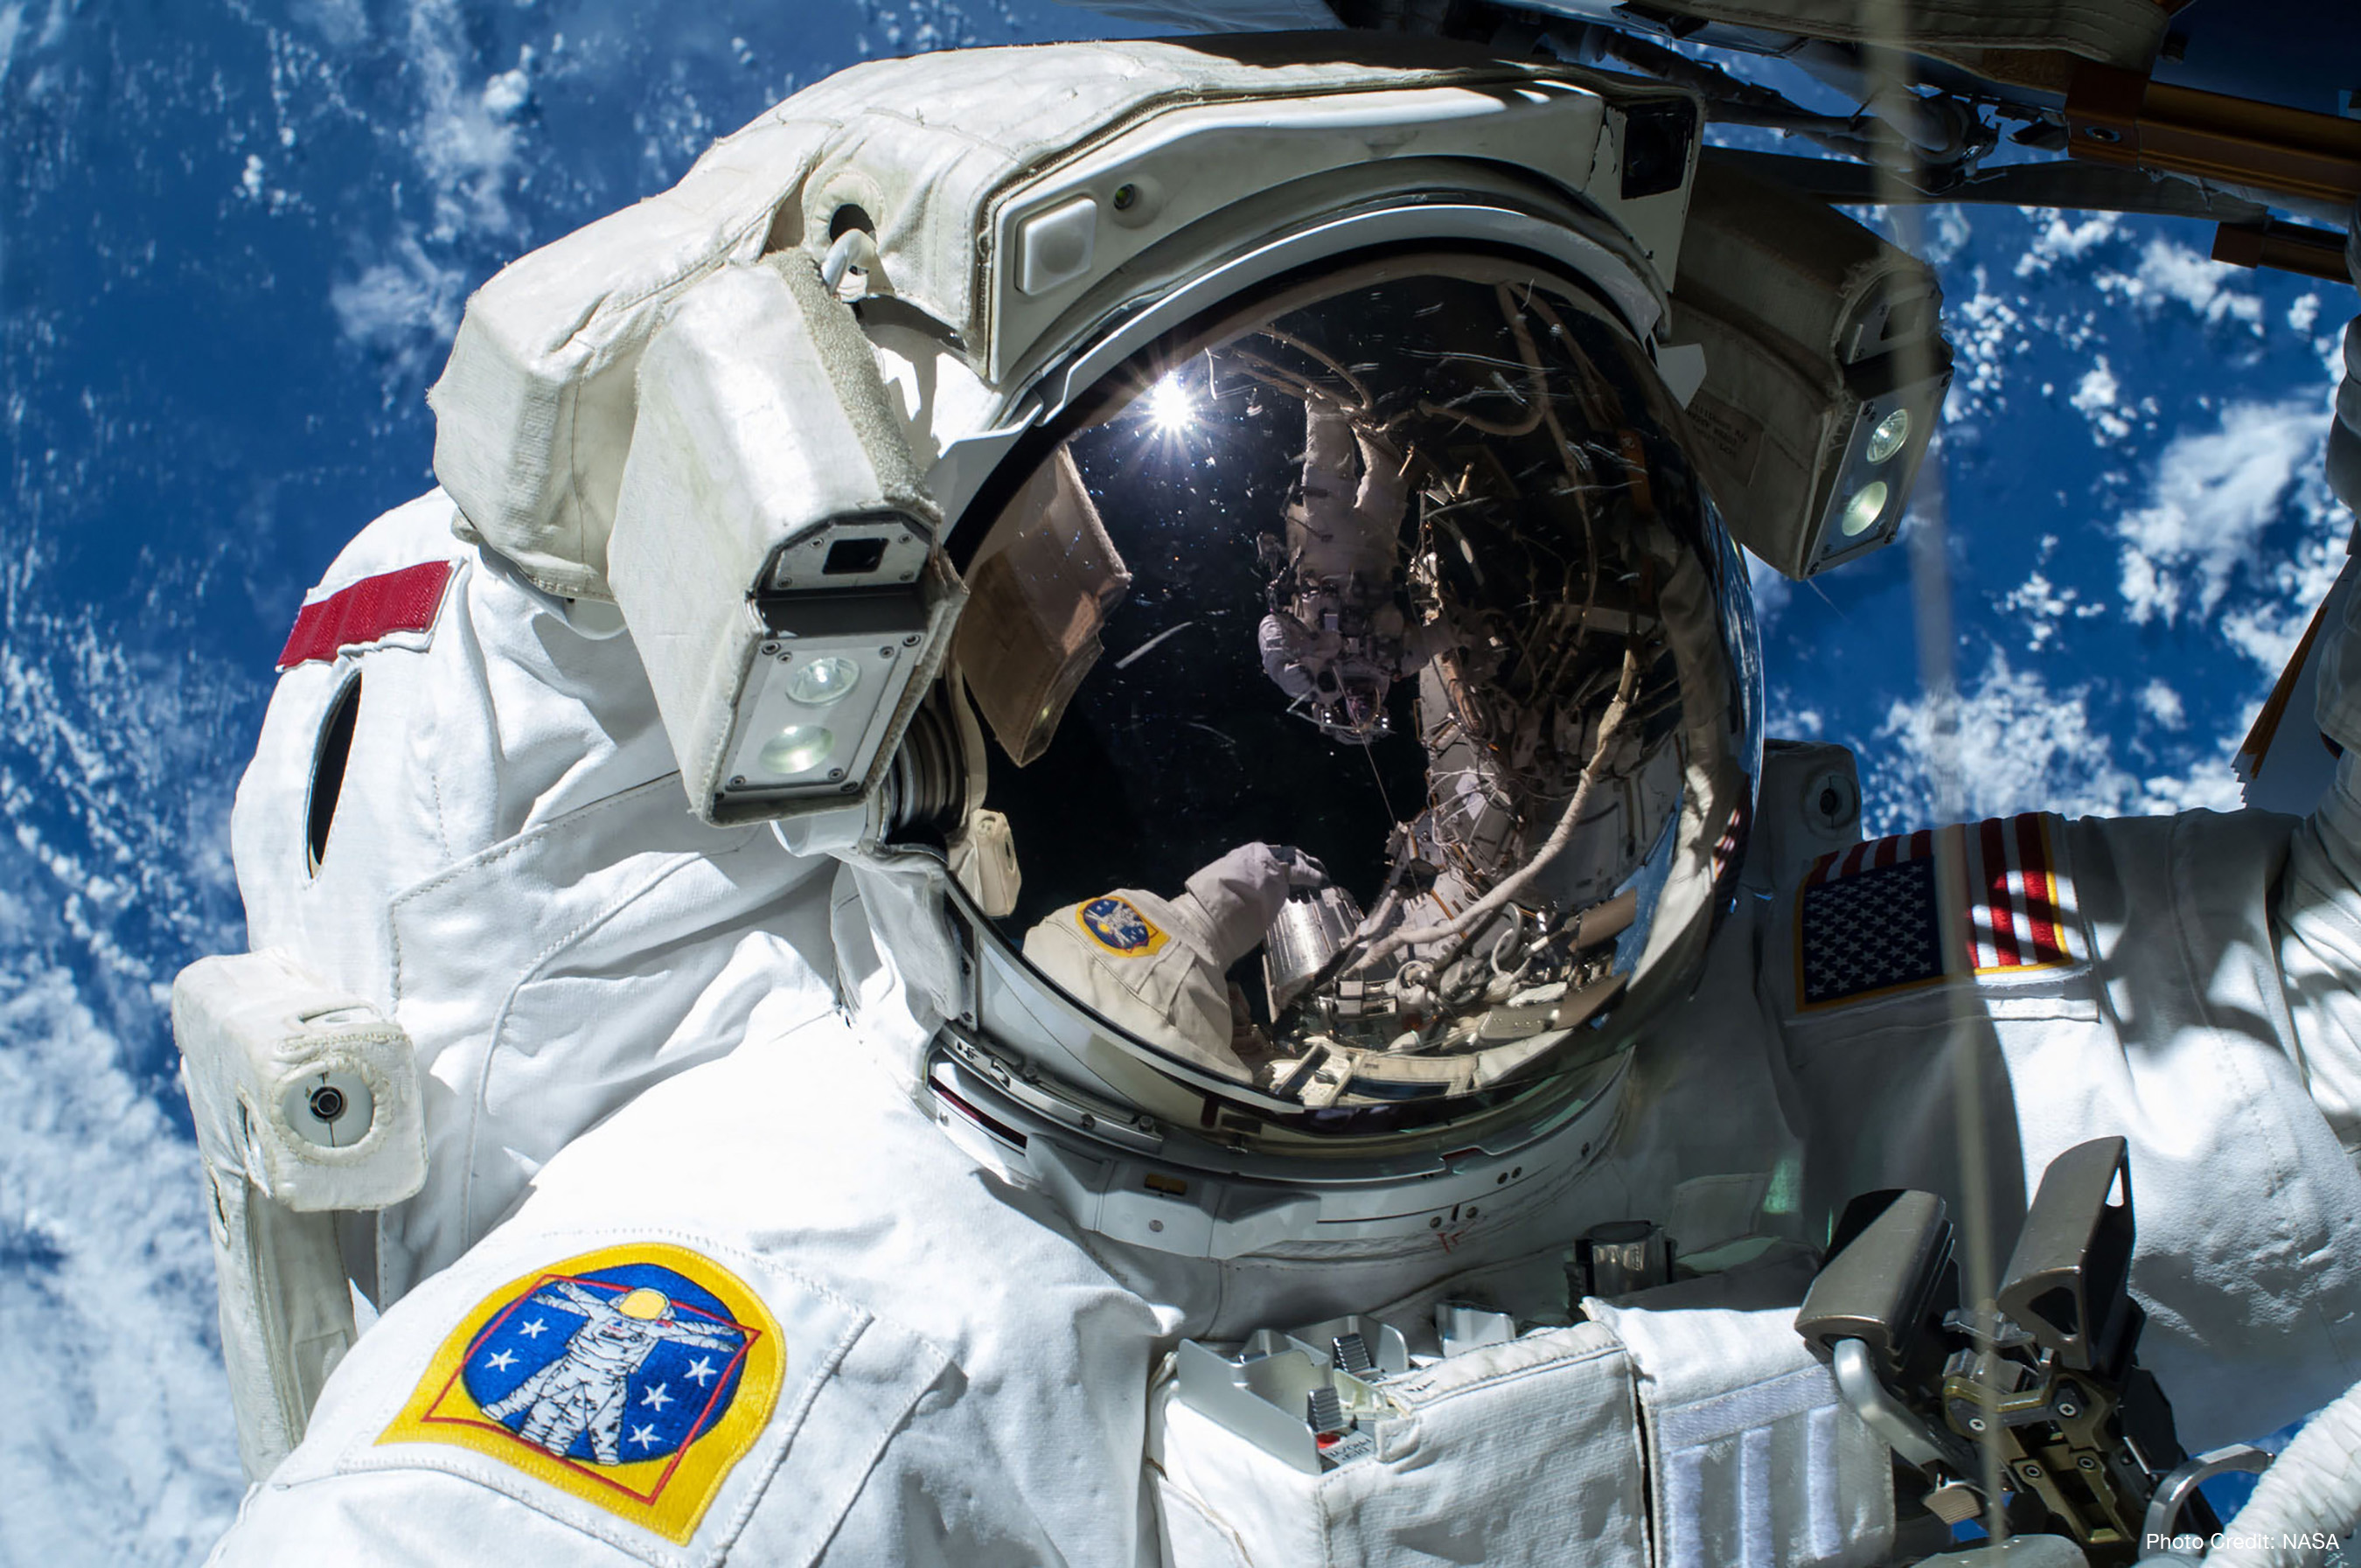 NASA astronaut Barry "Butch" Wilmore, Commander of Expedition 42 is caught by the camera during a spacewalk on Feb. 21, 2015, as the Earth's surface passes by in the background. Photo credit: NASA.